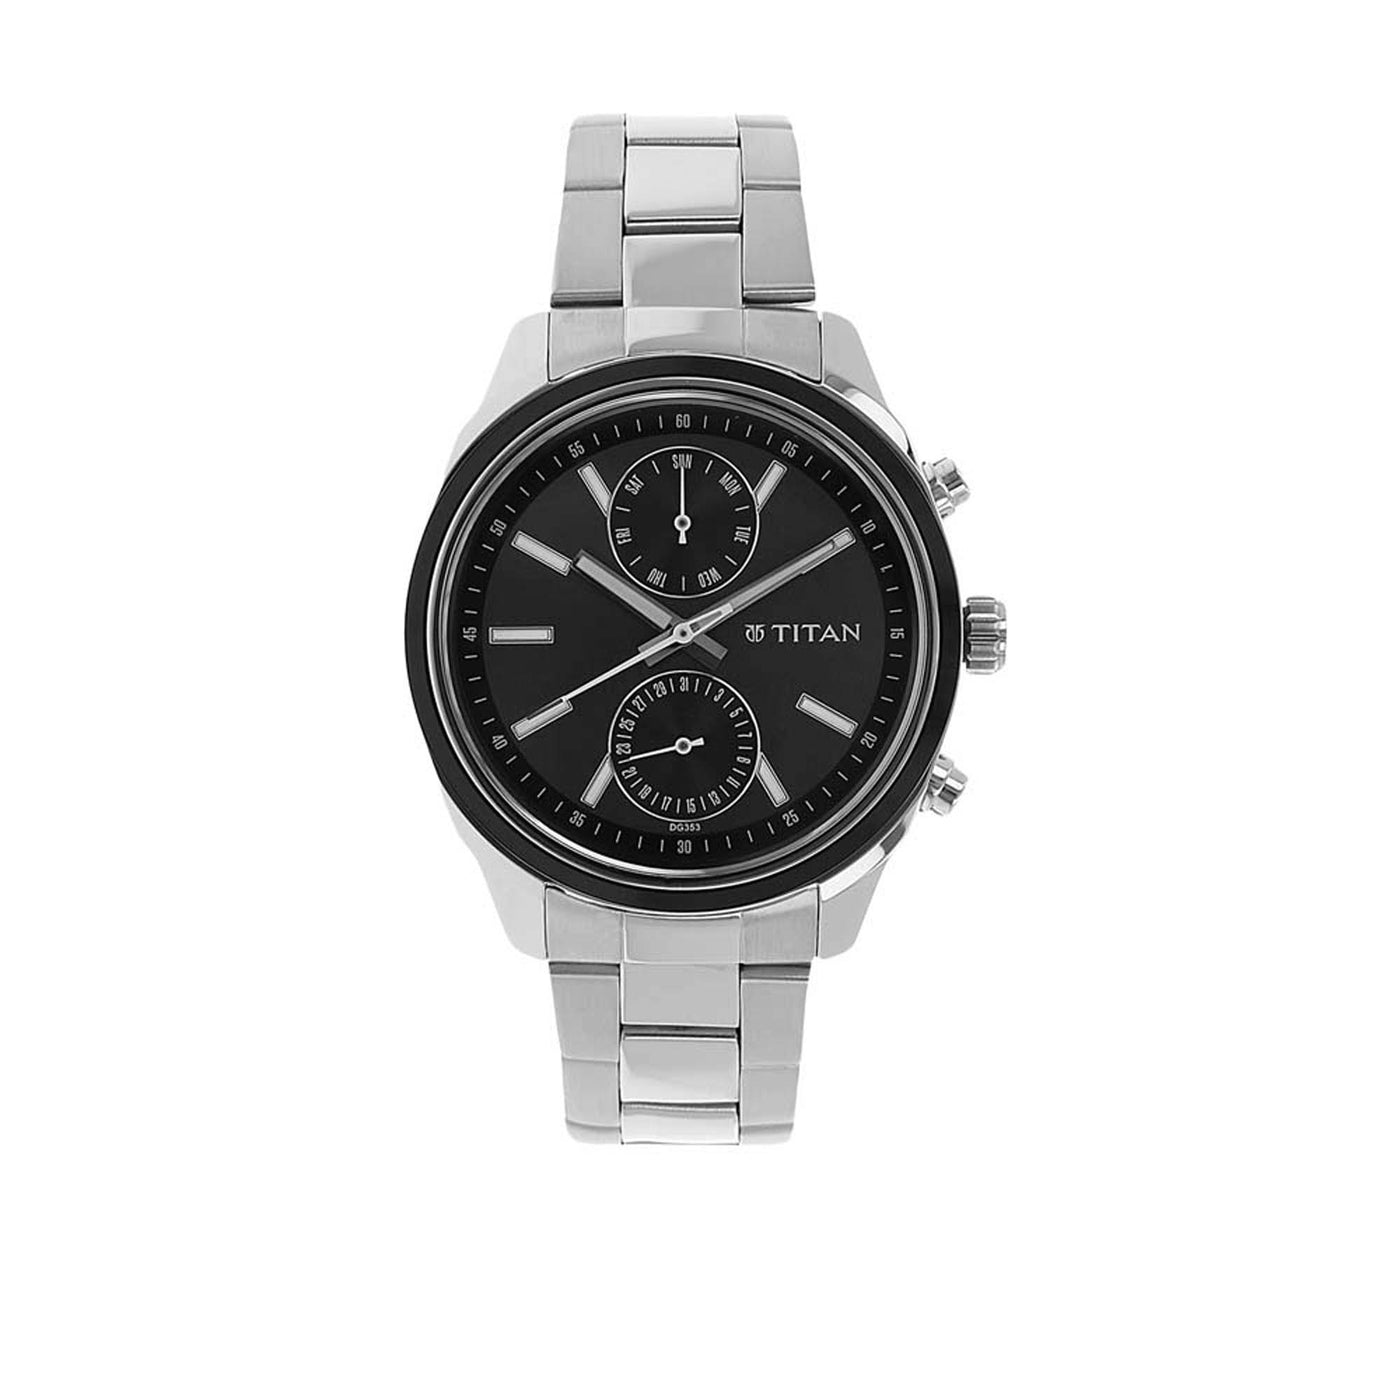 Neo Chronograph 48mm Stainless Steel Band